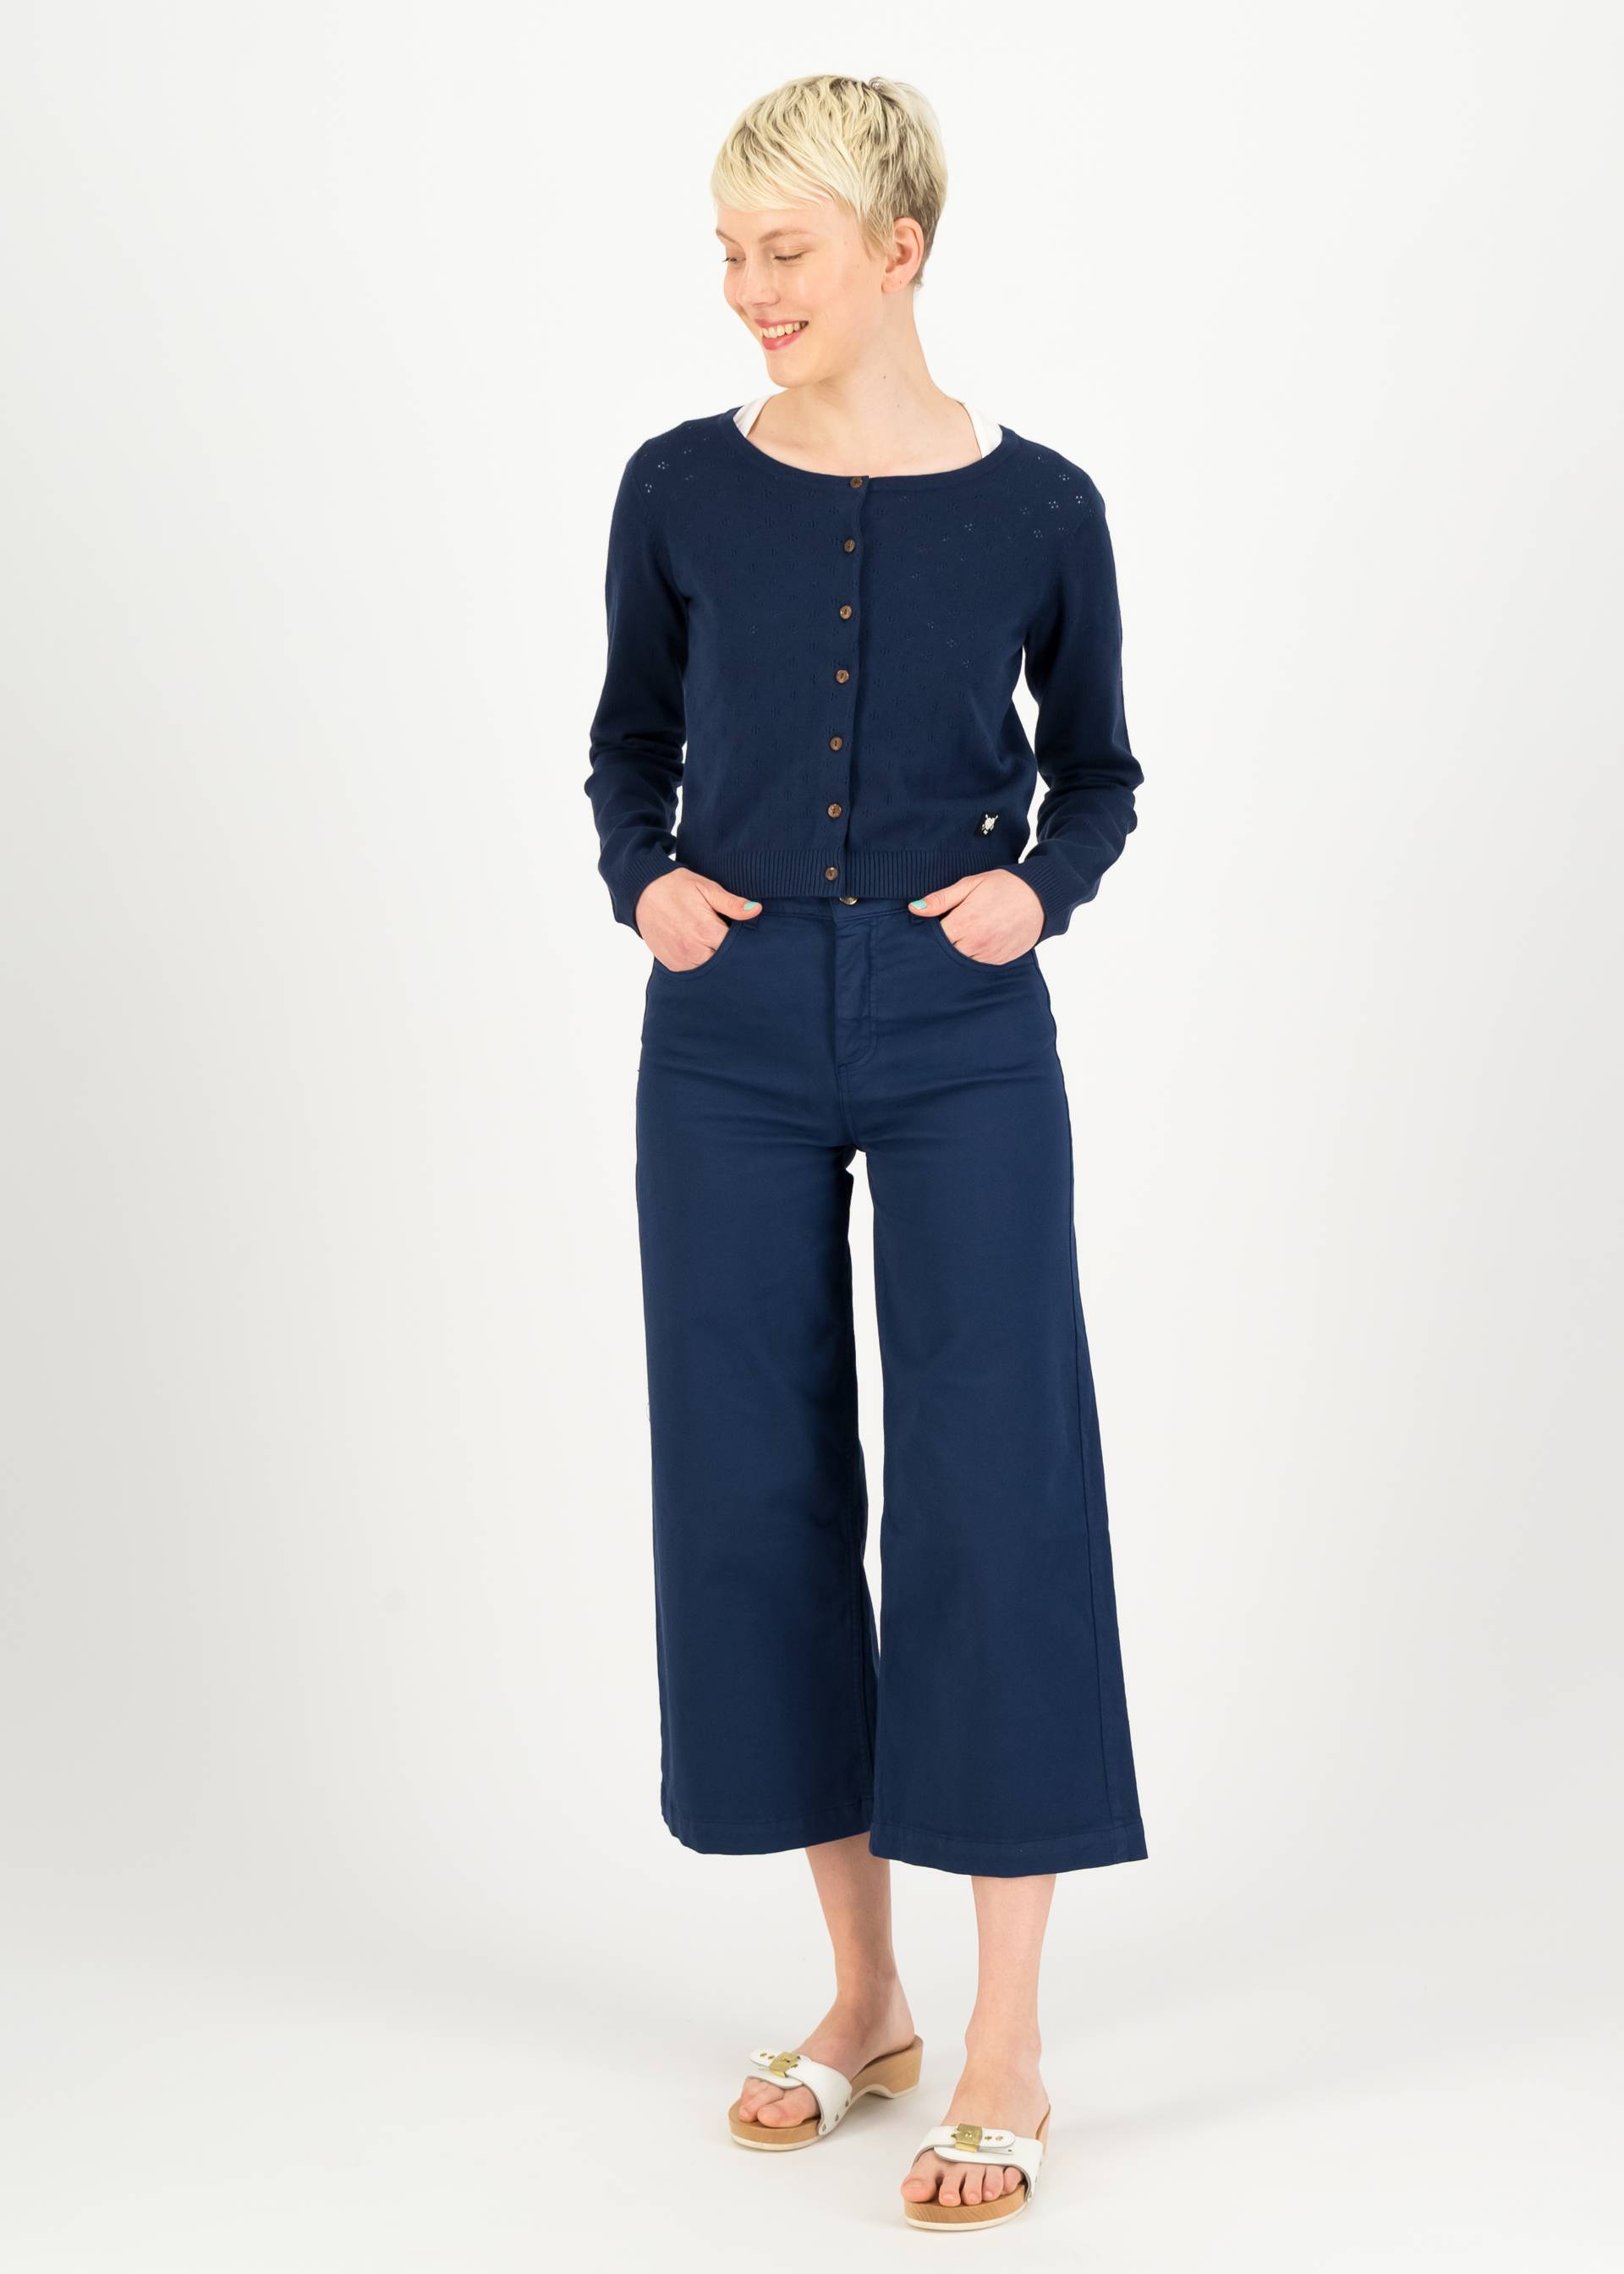 Cardigan Welcome to the Crew, little blue flower, Knitted Jumpers & Cardigans, Blue